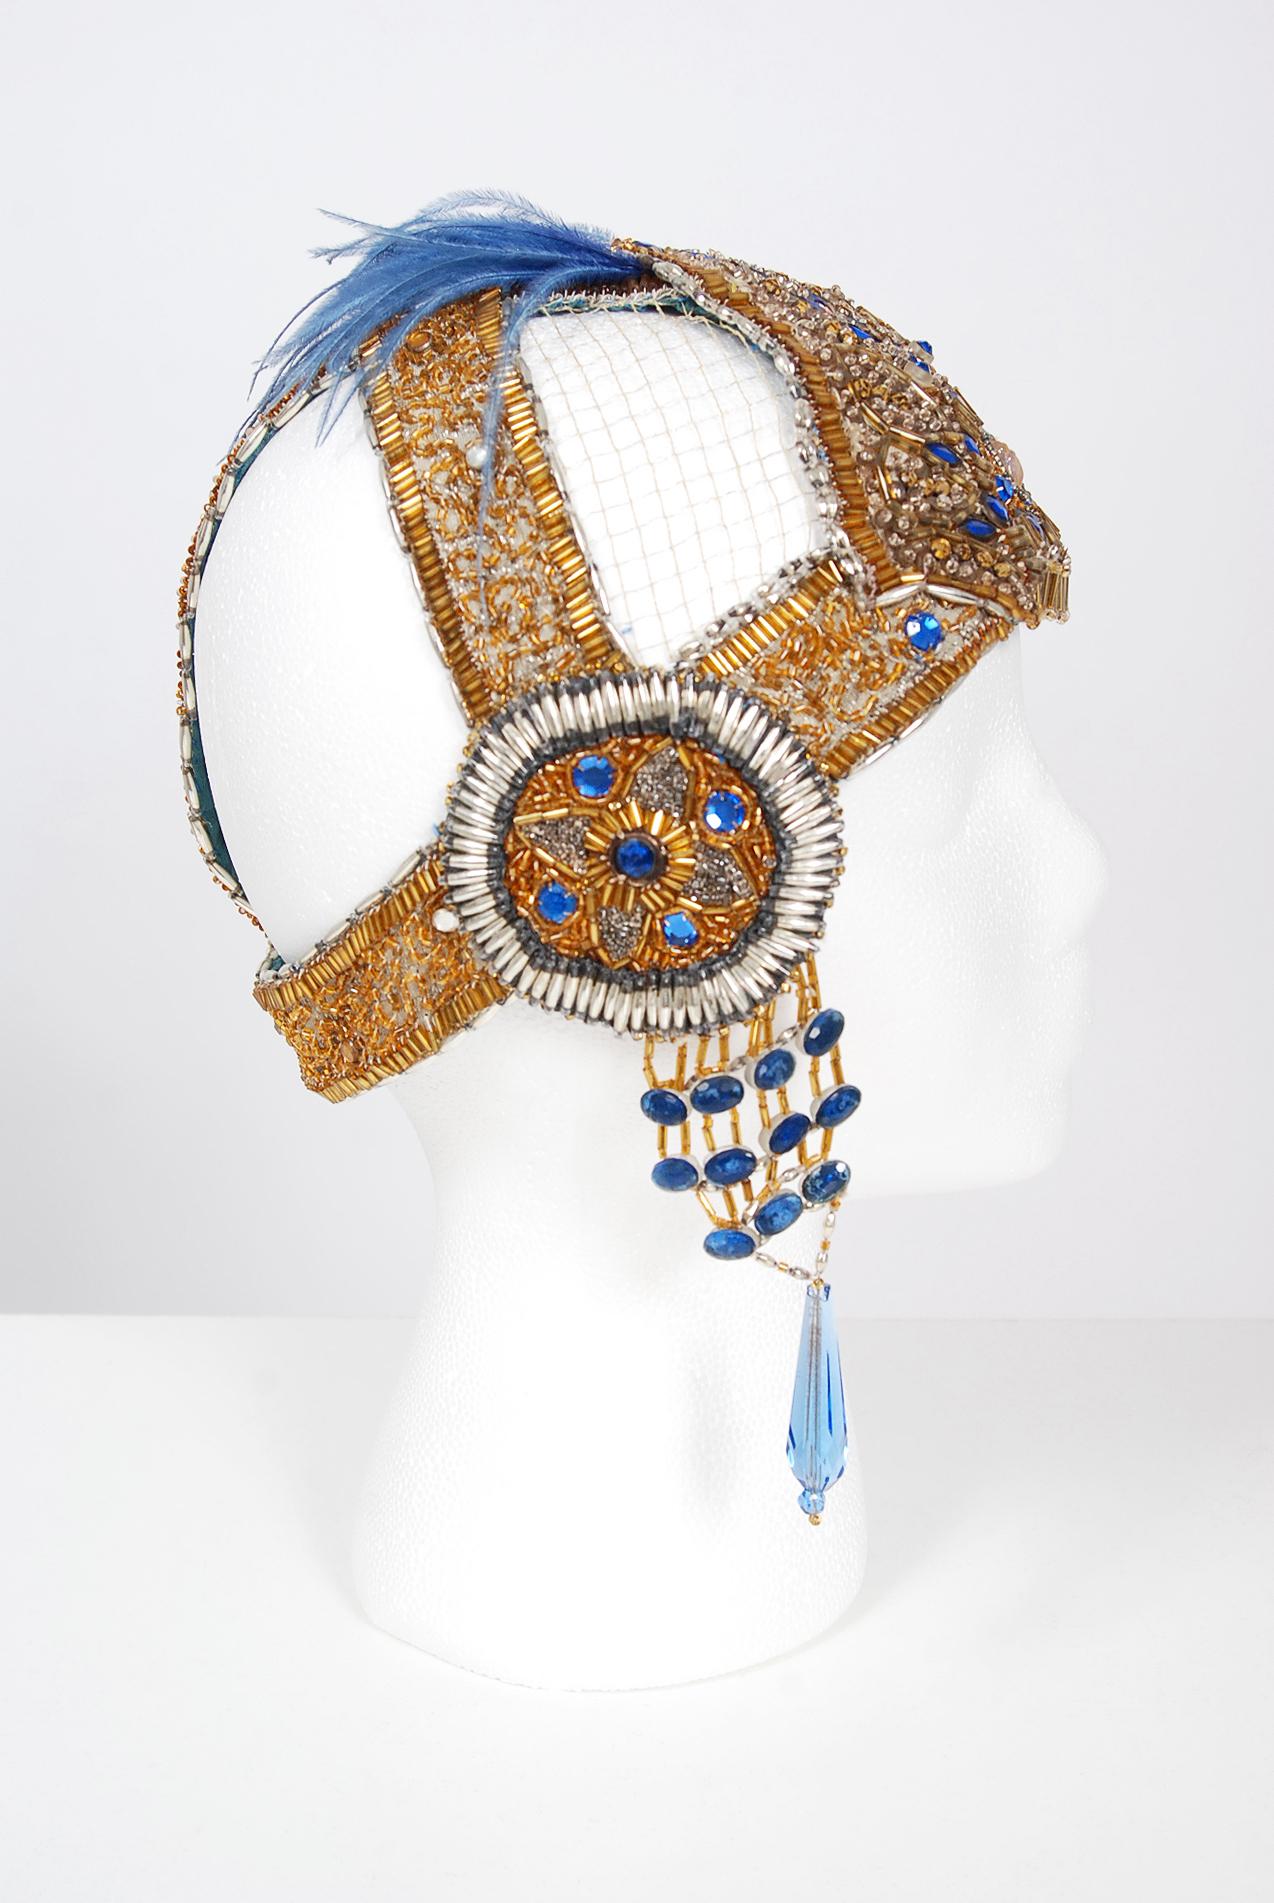 Breathtaking 1920's French metallic gold beaded and sapphire-blue jeweled flapper headdress. This is, without a doubt, one of the most extraordinary antique flapper period pieces I have ever laid eyes on. Large scale jewels, gold sequins and